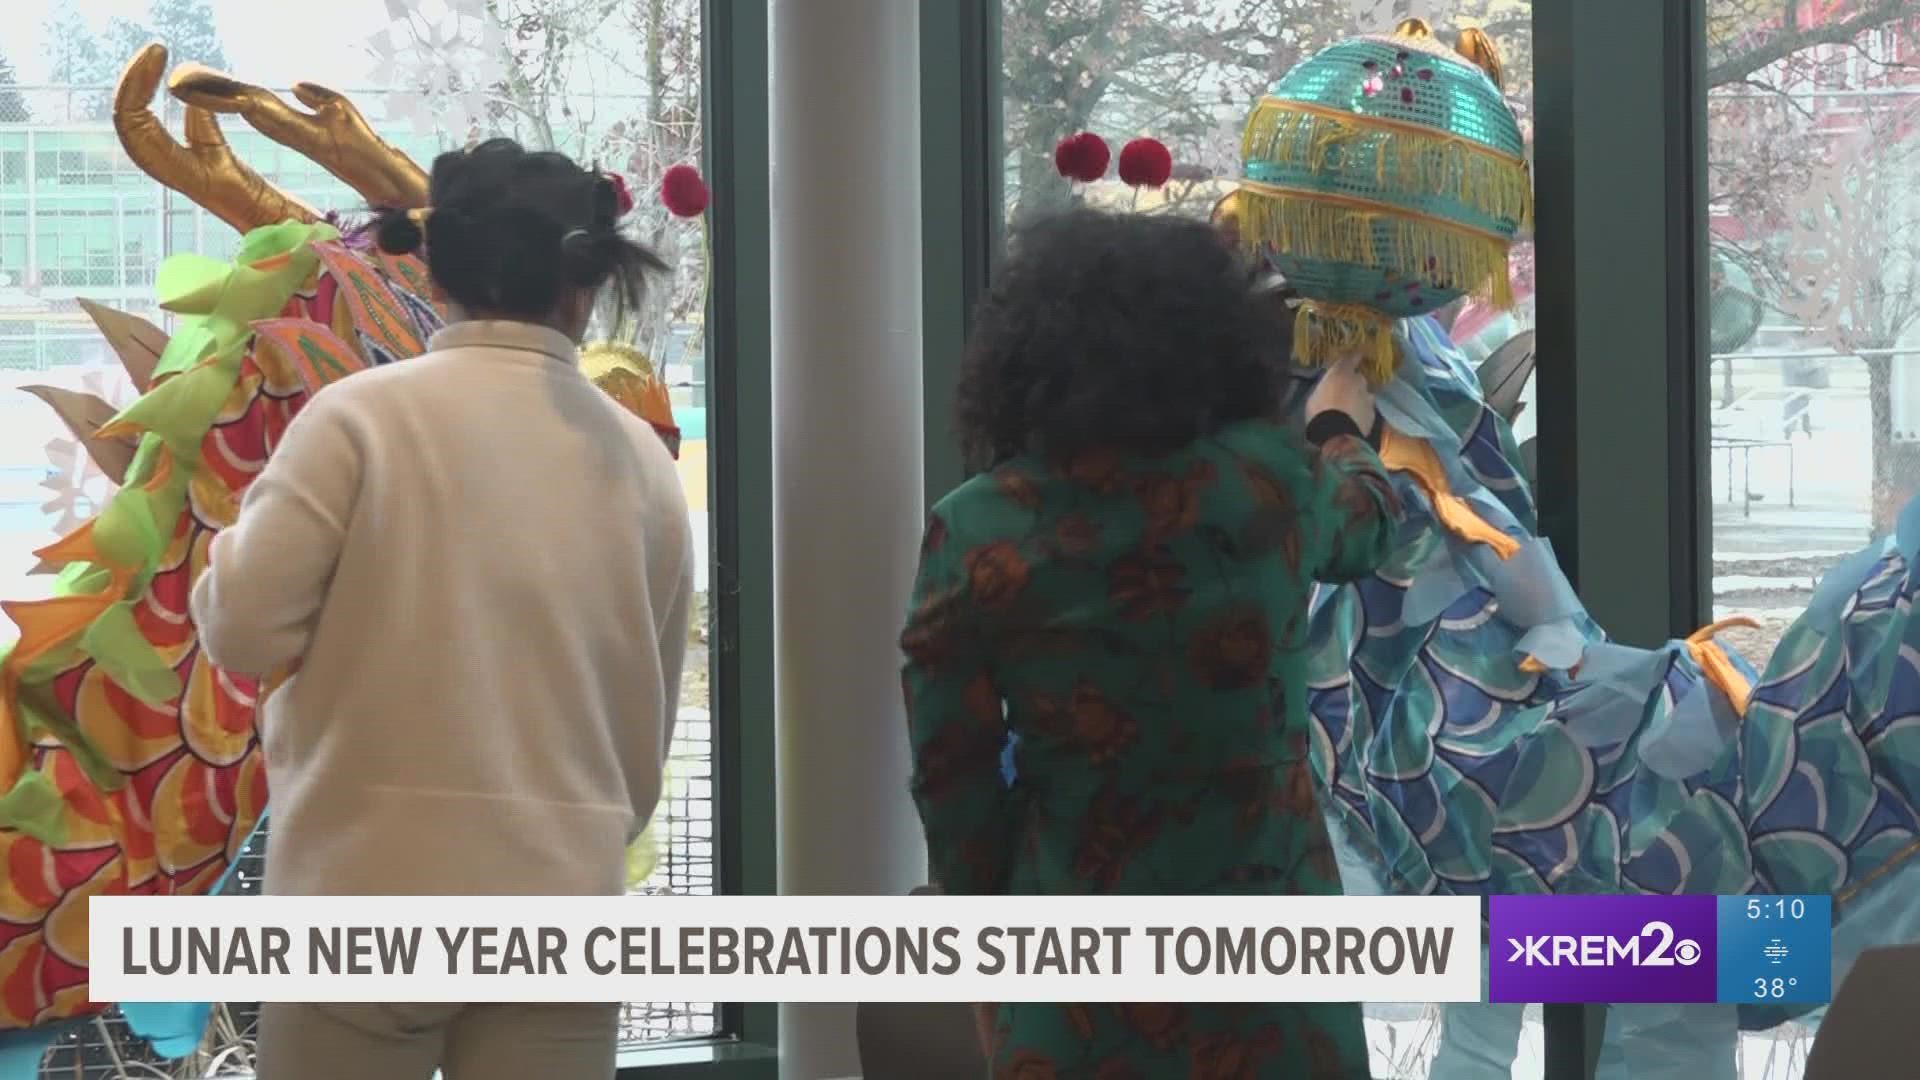 Although the official holiday is on Sunday, Spokane residents are getting ready to celebrate Lunar New Year all weekend long.